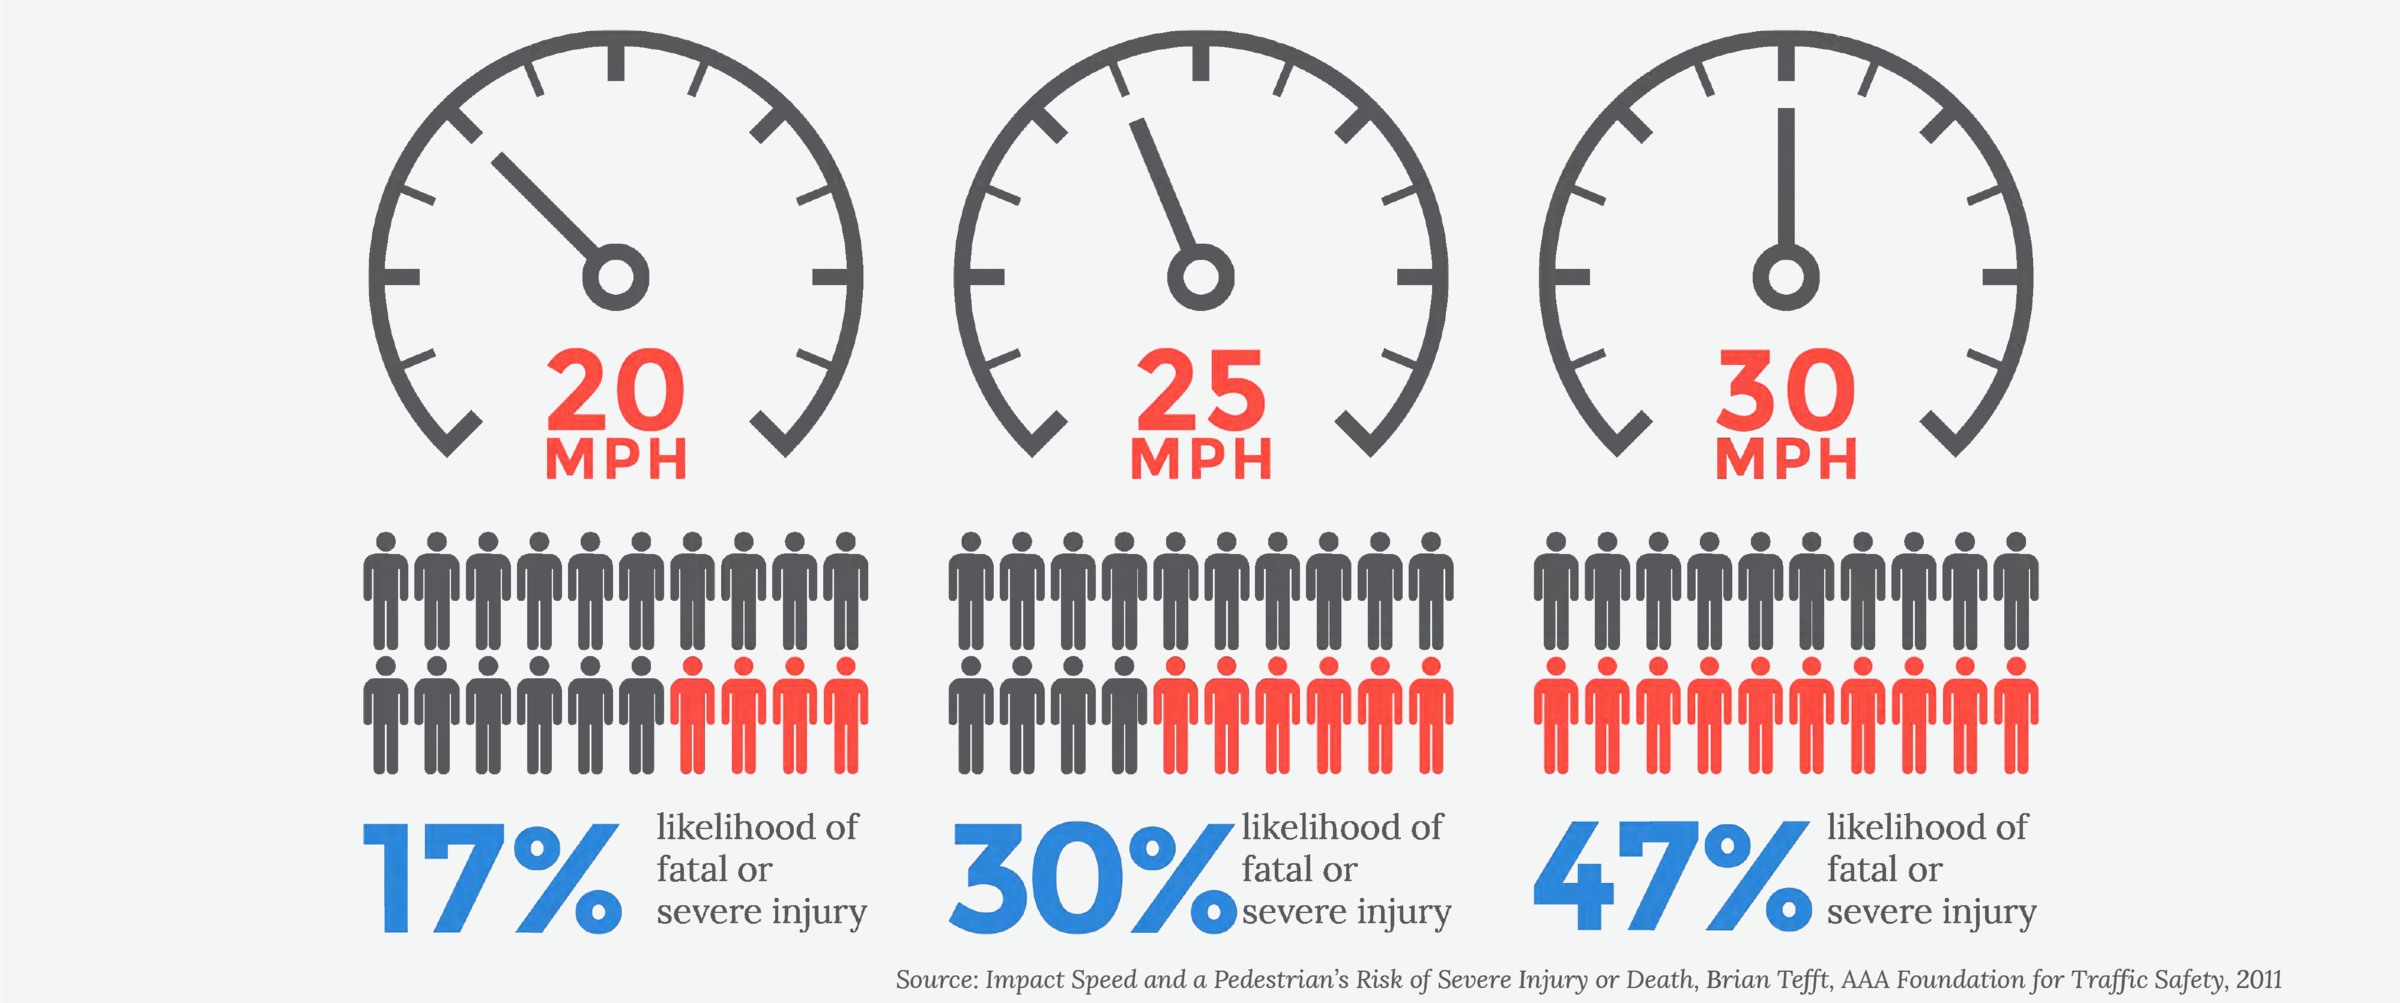 Graphic shows that people are 17% likely to be killed or seriously injured by a car traveling 20 mph; 30% likely if the car is driven at 25 mph; and 47% likely if the driver is going 30 mph.